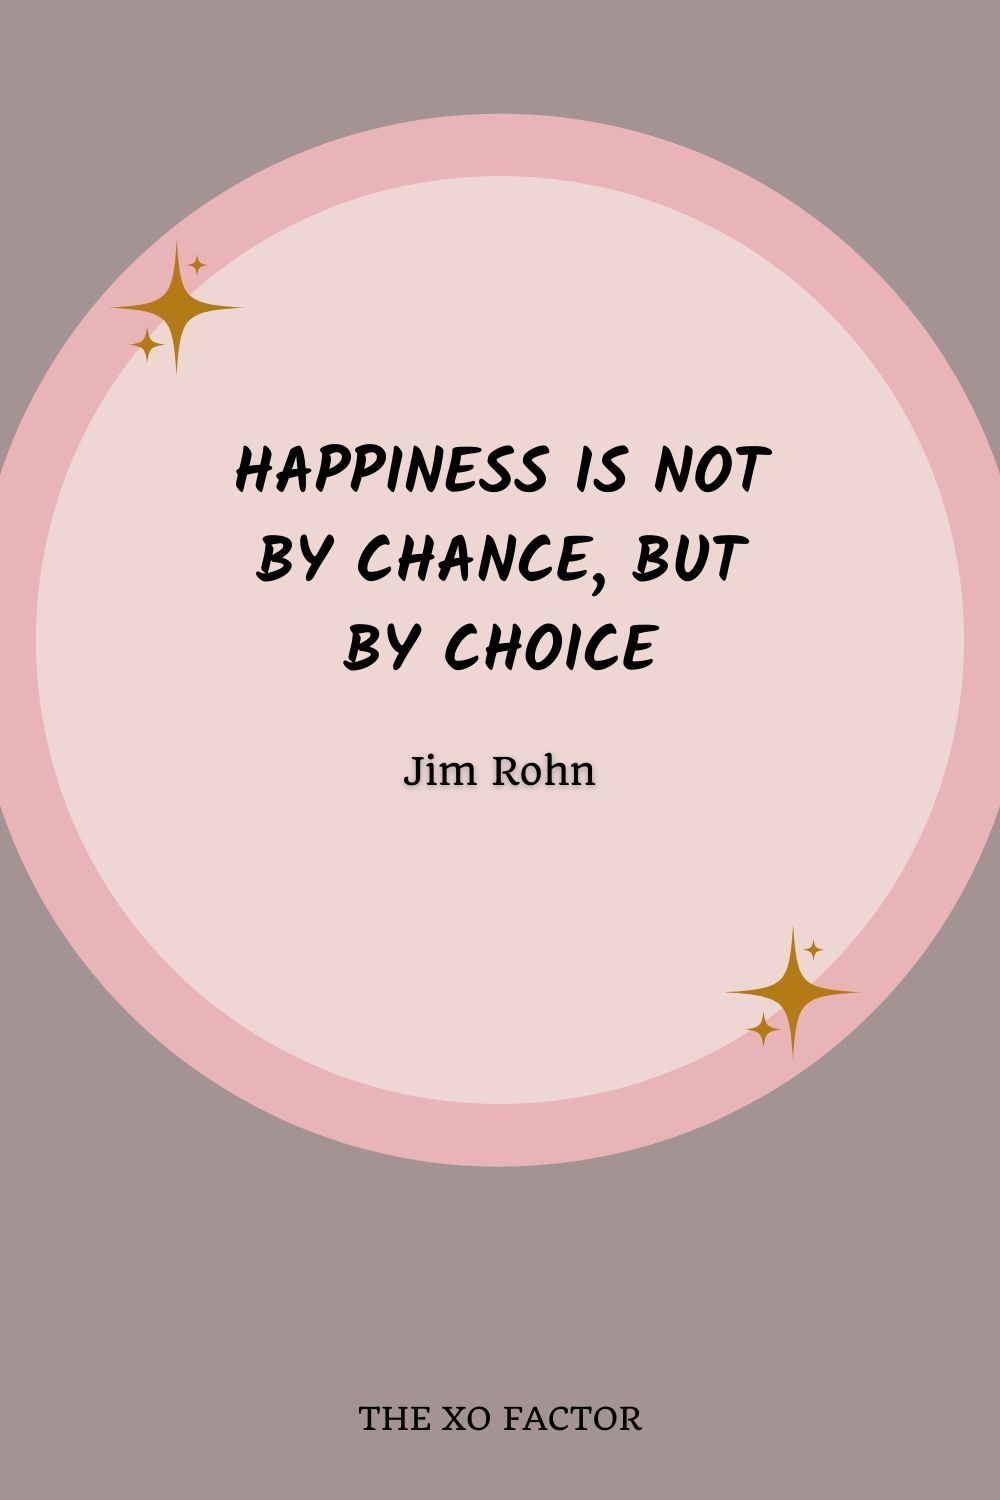 Happiness is not by chance, but by choice.” – Jim Rohn